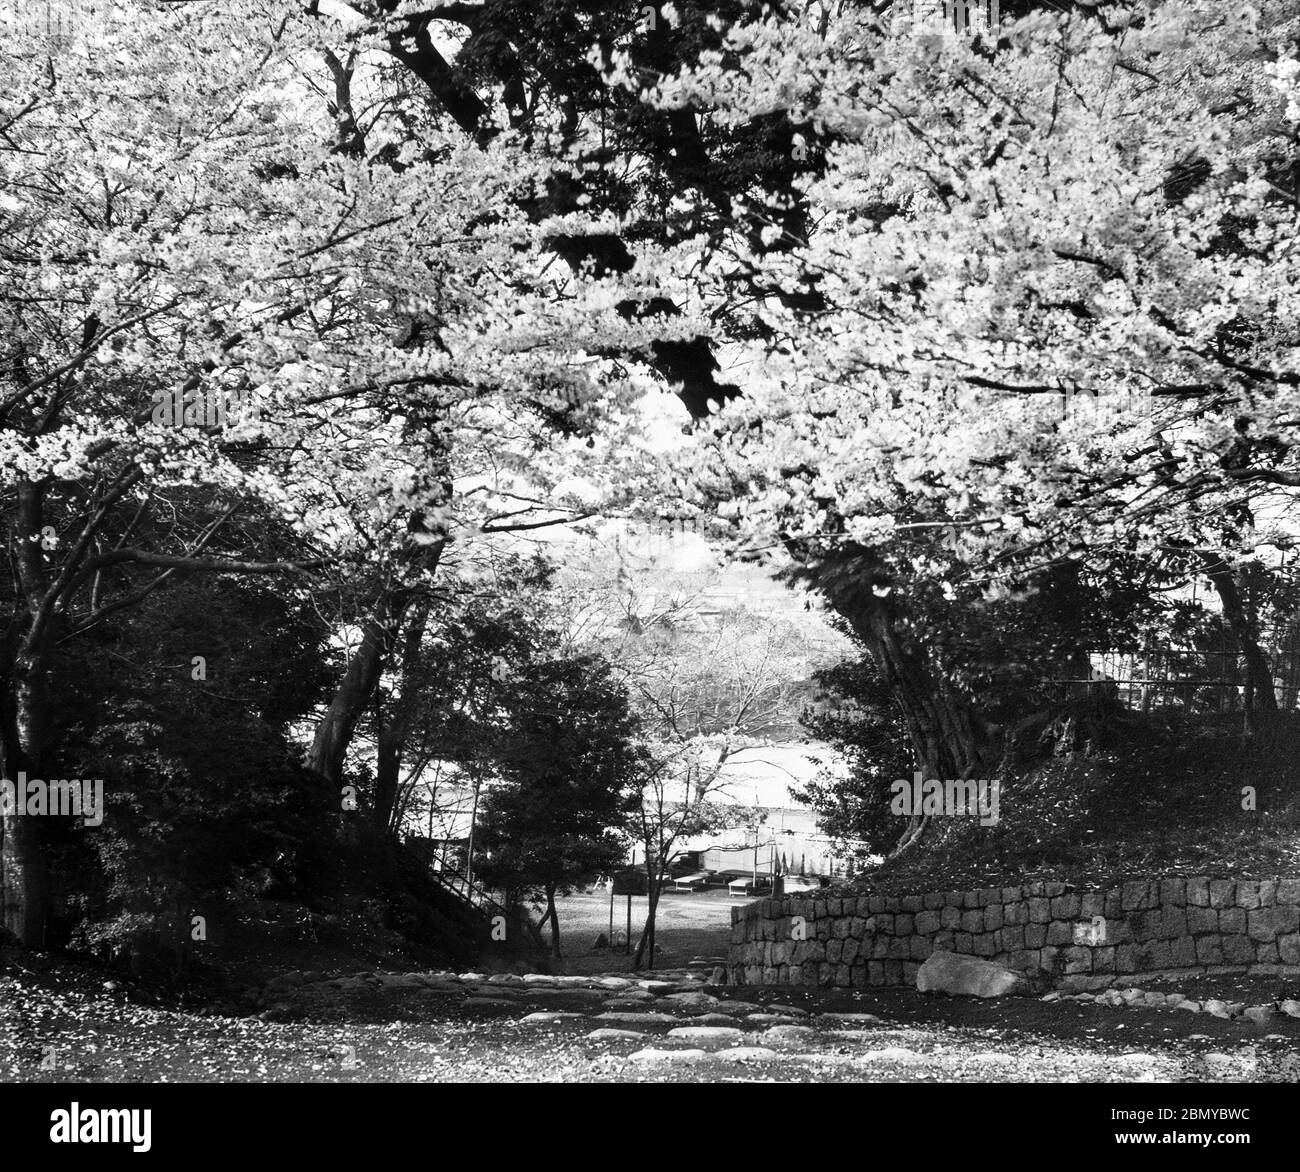 [ 1890s Japan - Ueno Park, Tokyo ] —   Cherry blossom at Ueno Park in Tokyo. In the far back a glimpse of Shinobazu Pond can be seen.  From a series of glass slides published (but not photographed) by Scottish photographer George Washington Wilson (1823–1893). Wilson’s firm was one of the largest publishers of photographic prints in the world.  19th century vintage glass slide. Stock Photo